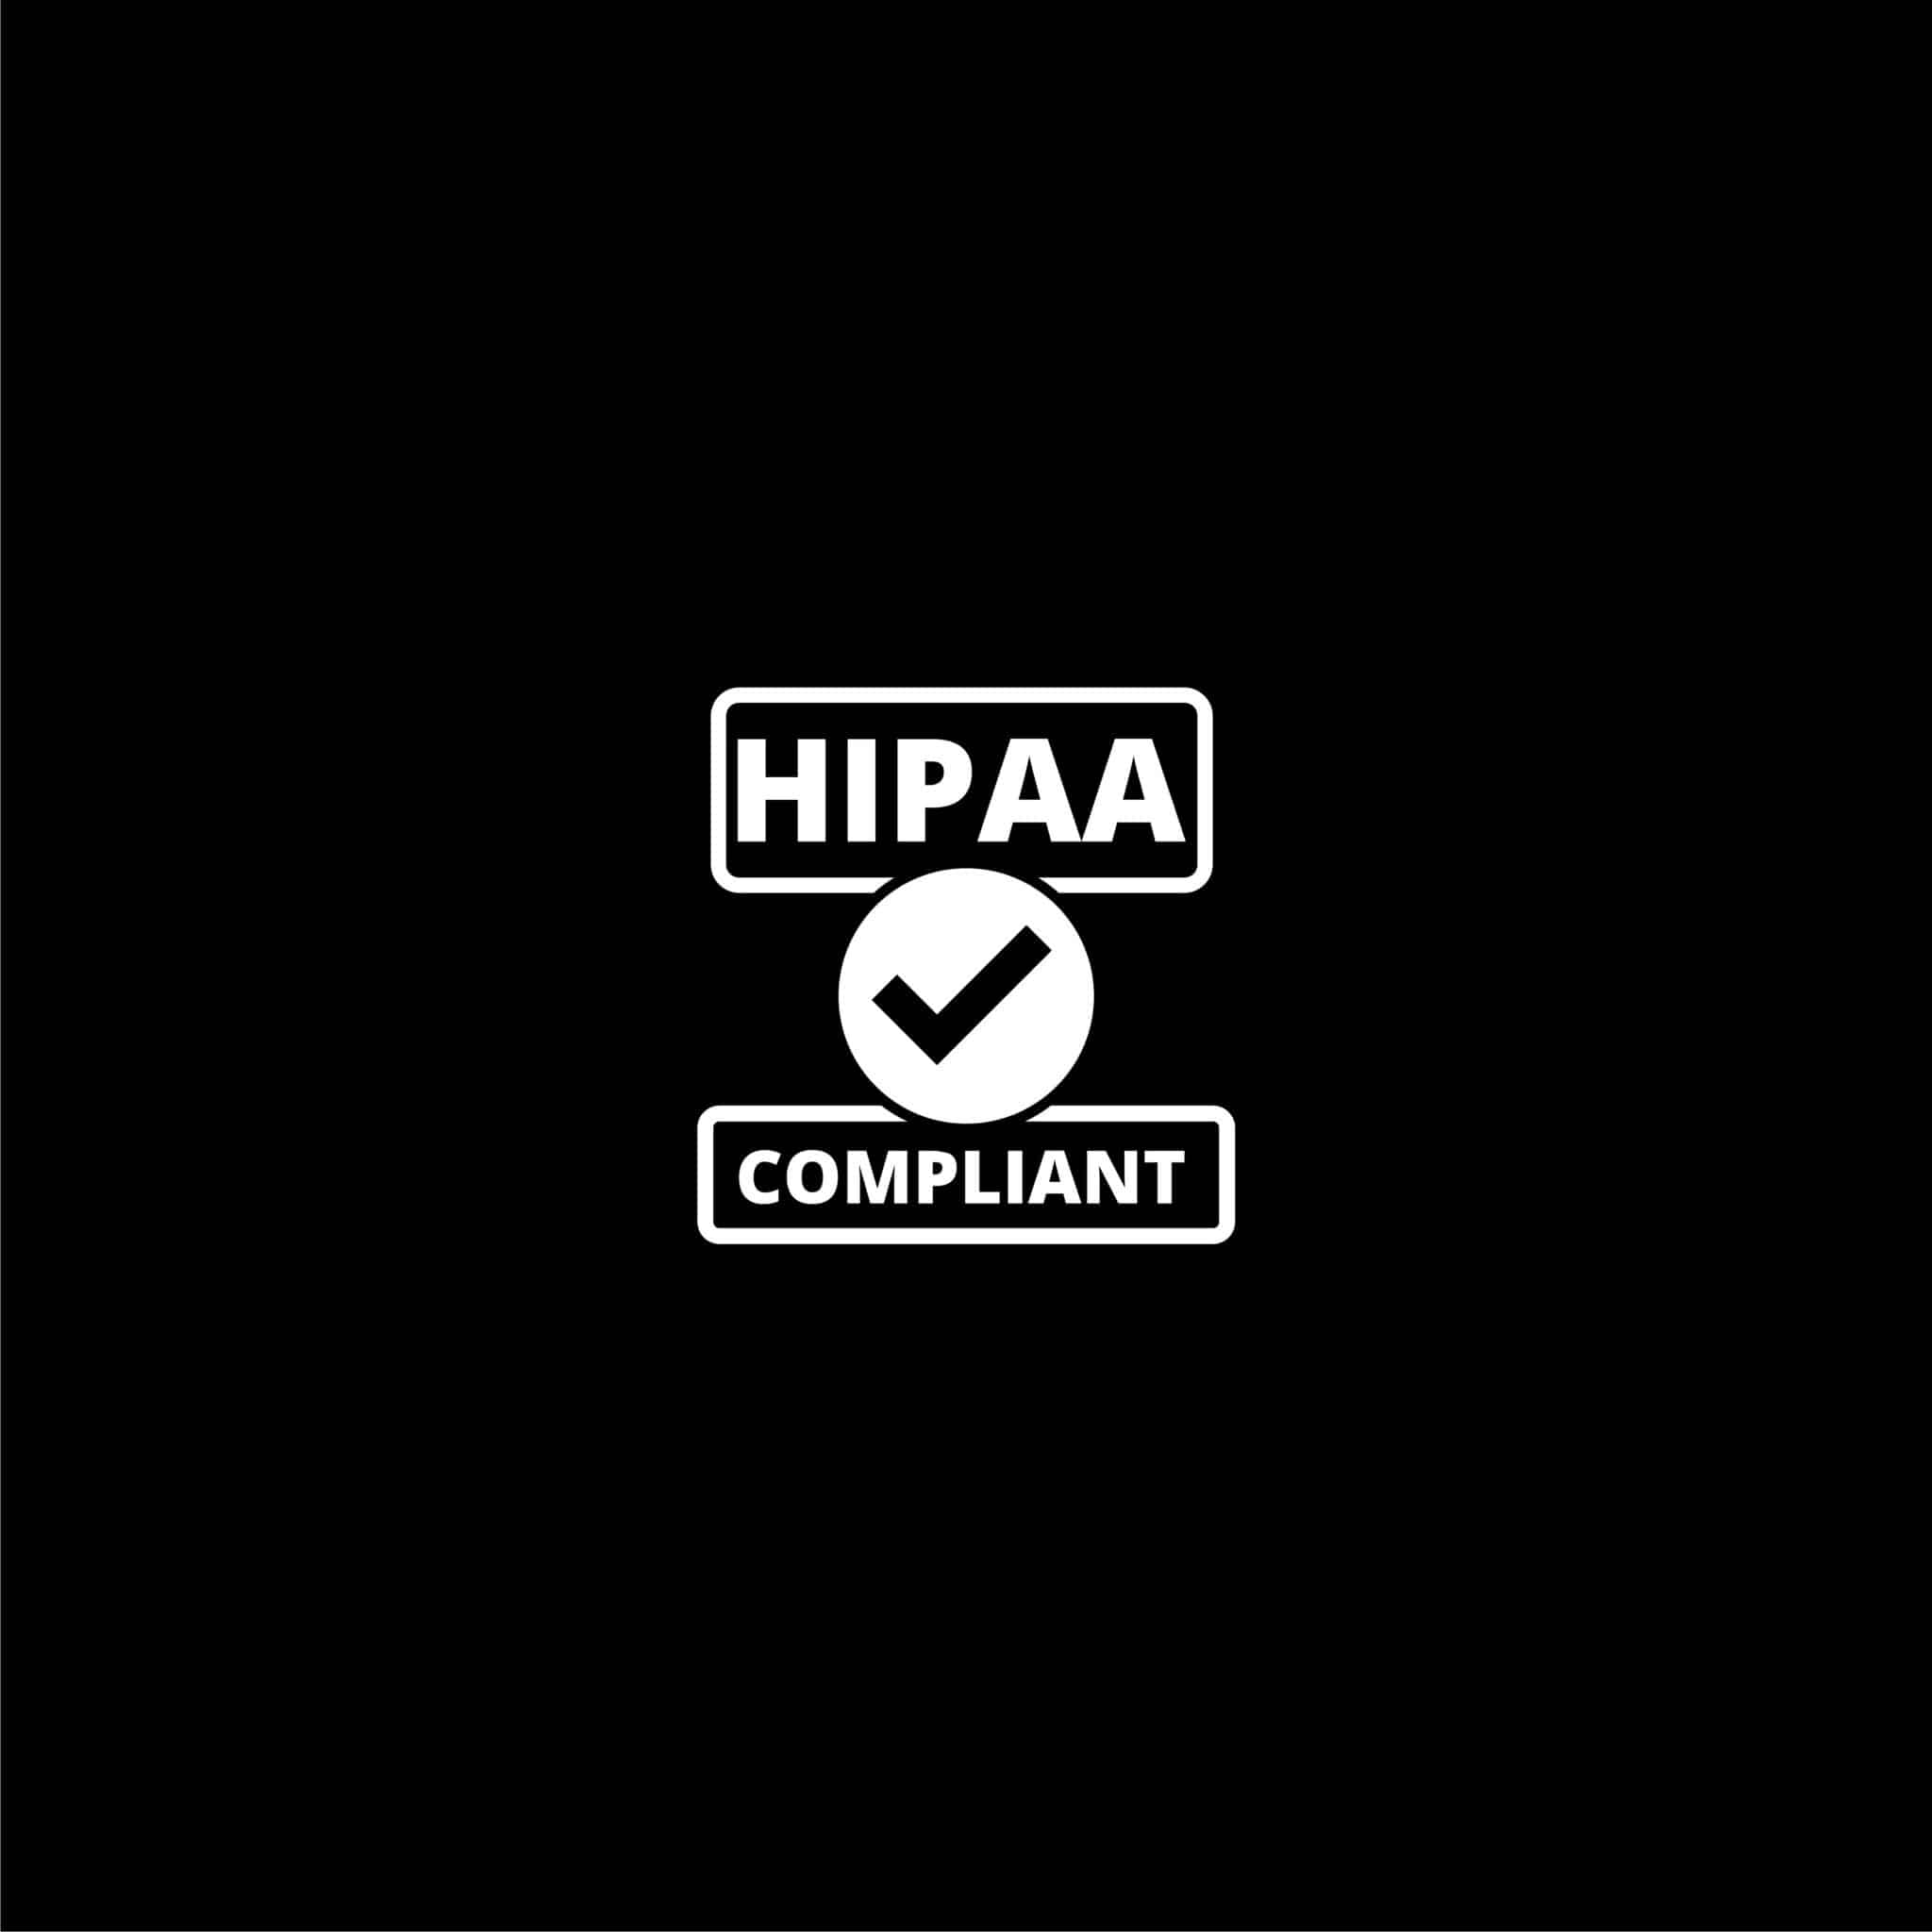 Athreon provides independently audited HIPAA-compliant transcription services to several verticals.